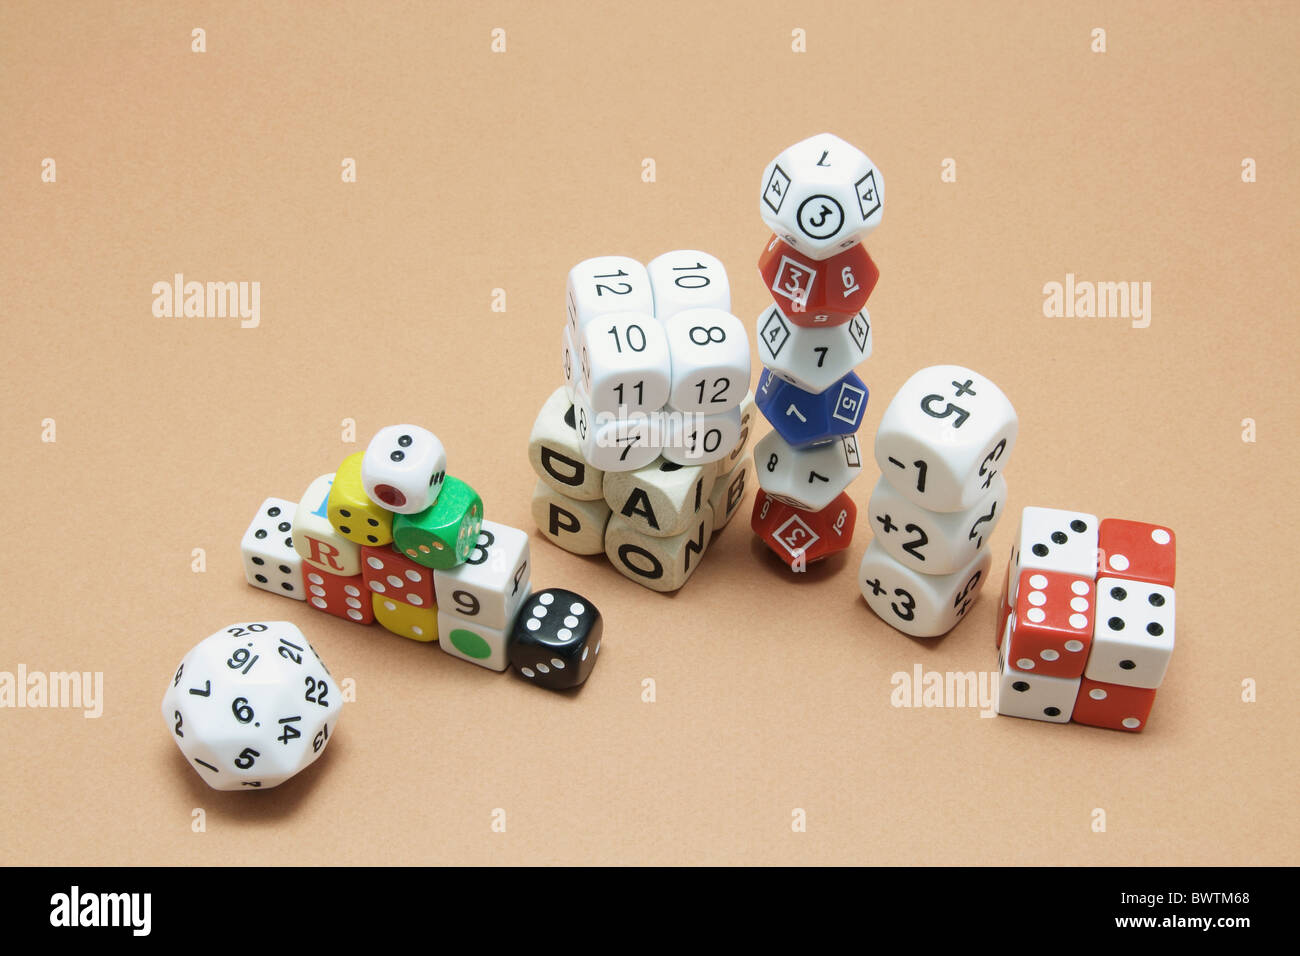 Stacks of Assorted Dice Stock Photo